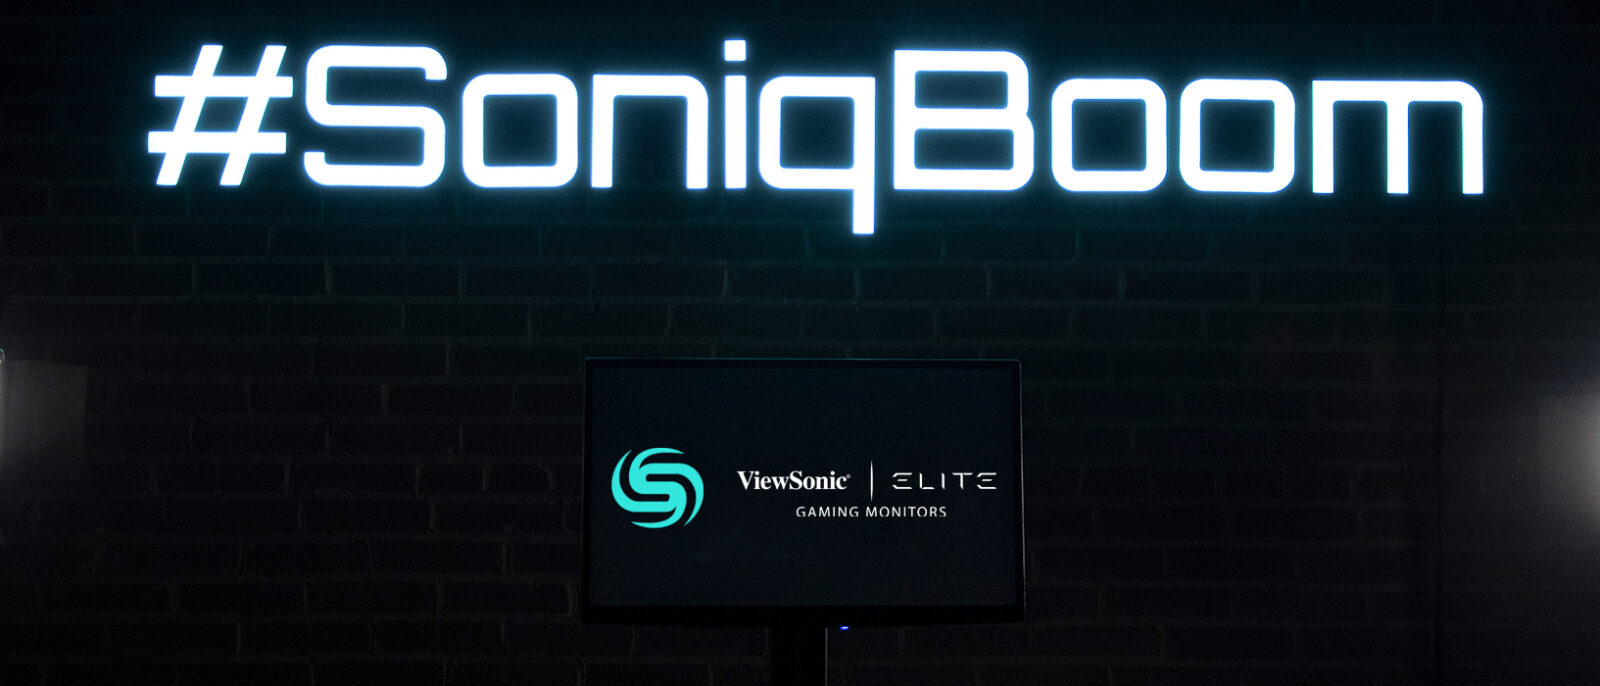 HU students to benefit from new ViewSonic Multi-Year Partnership with Soniqs Esports Team